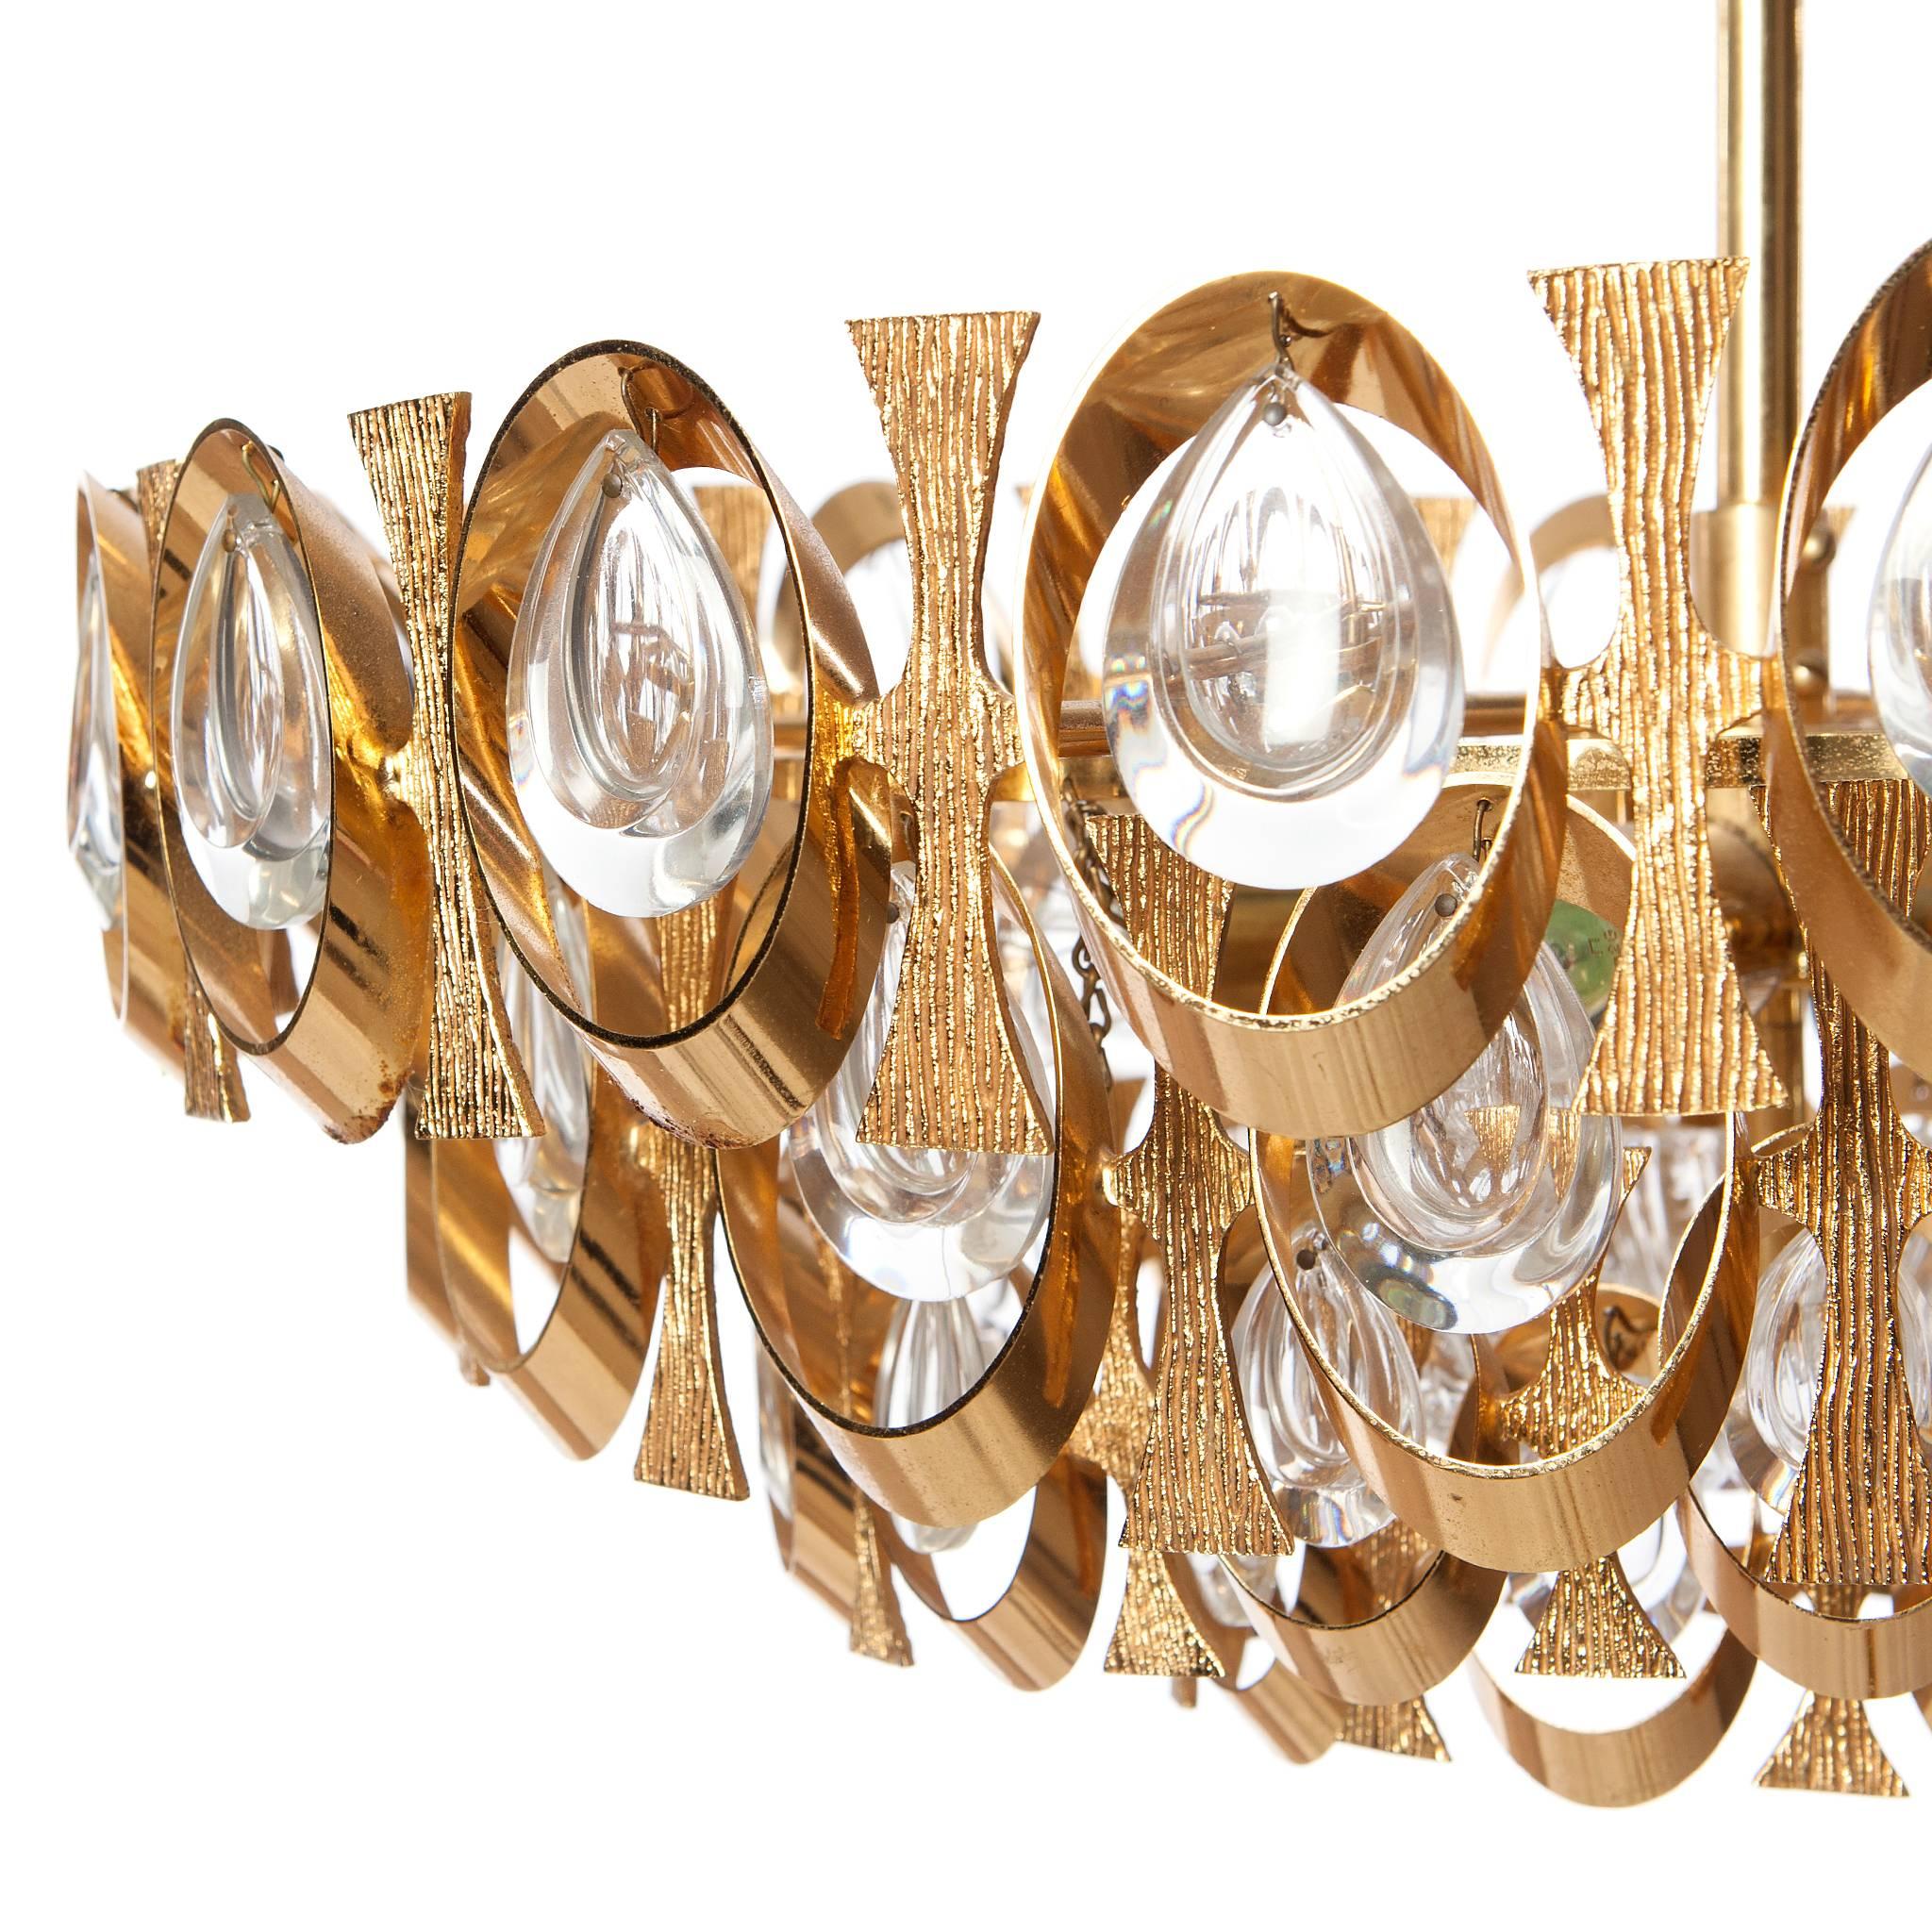 Unique eight-light chandelier with gilt brass beautifully shaped rings and plates. Its truly amazing with all it's crystal prisms excellent condition. By Gaetano Sciolari for Palwa.
Please note we have several chandelier in similar style and sizes.